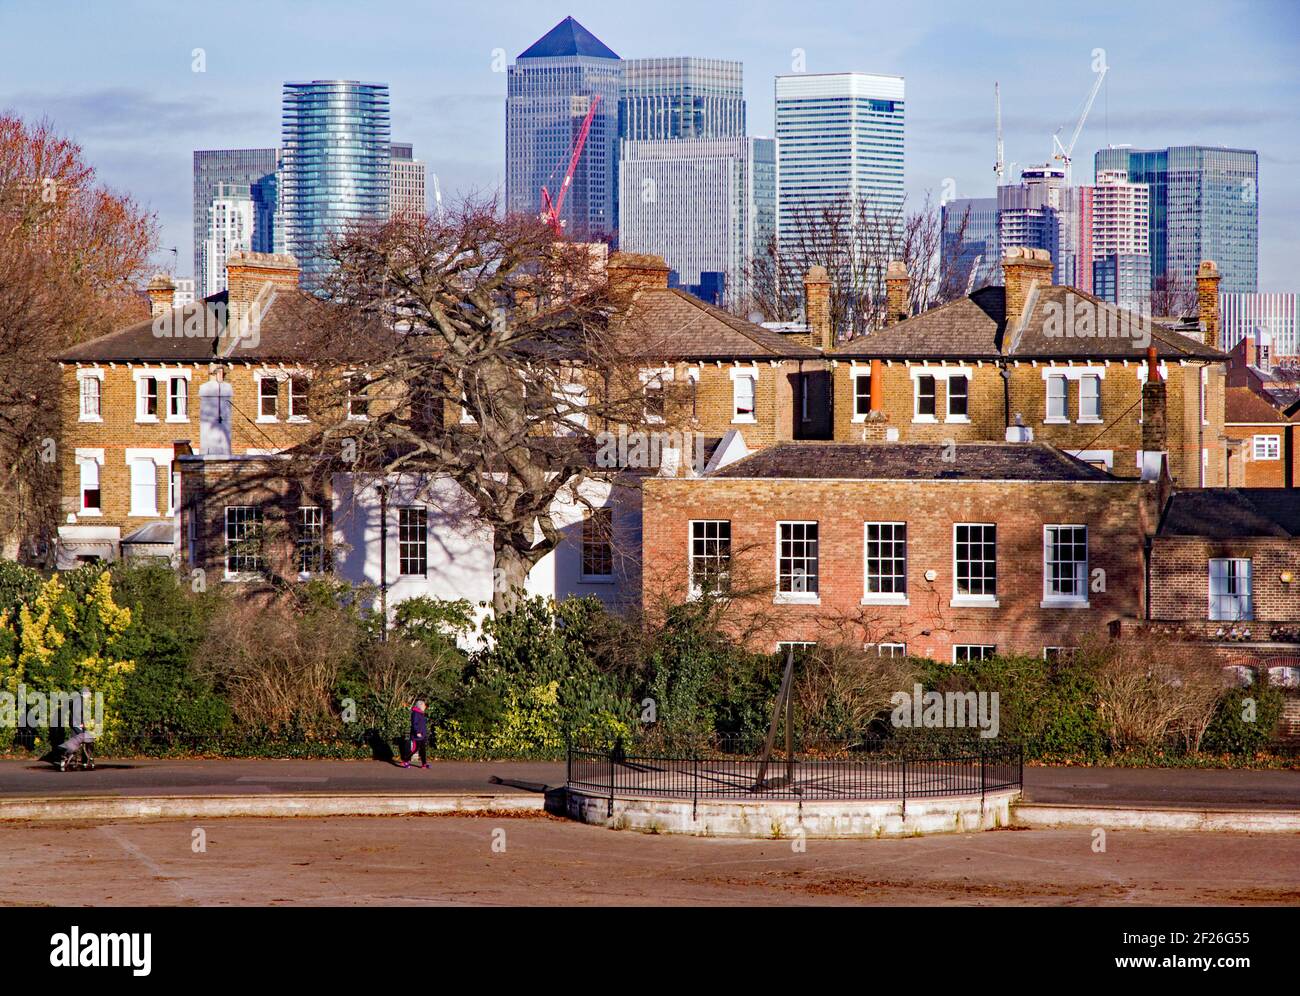 Contrast between Victorian and Edwardian houses in Greenwich, London, England, and the skyscrapers of Isle of Dogs or docklands area in the background Stock Photo